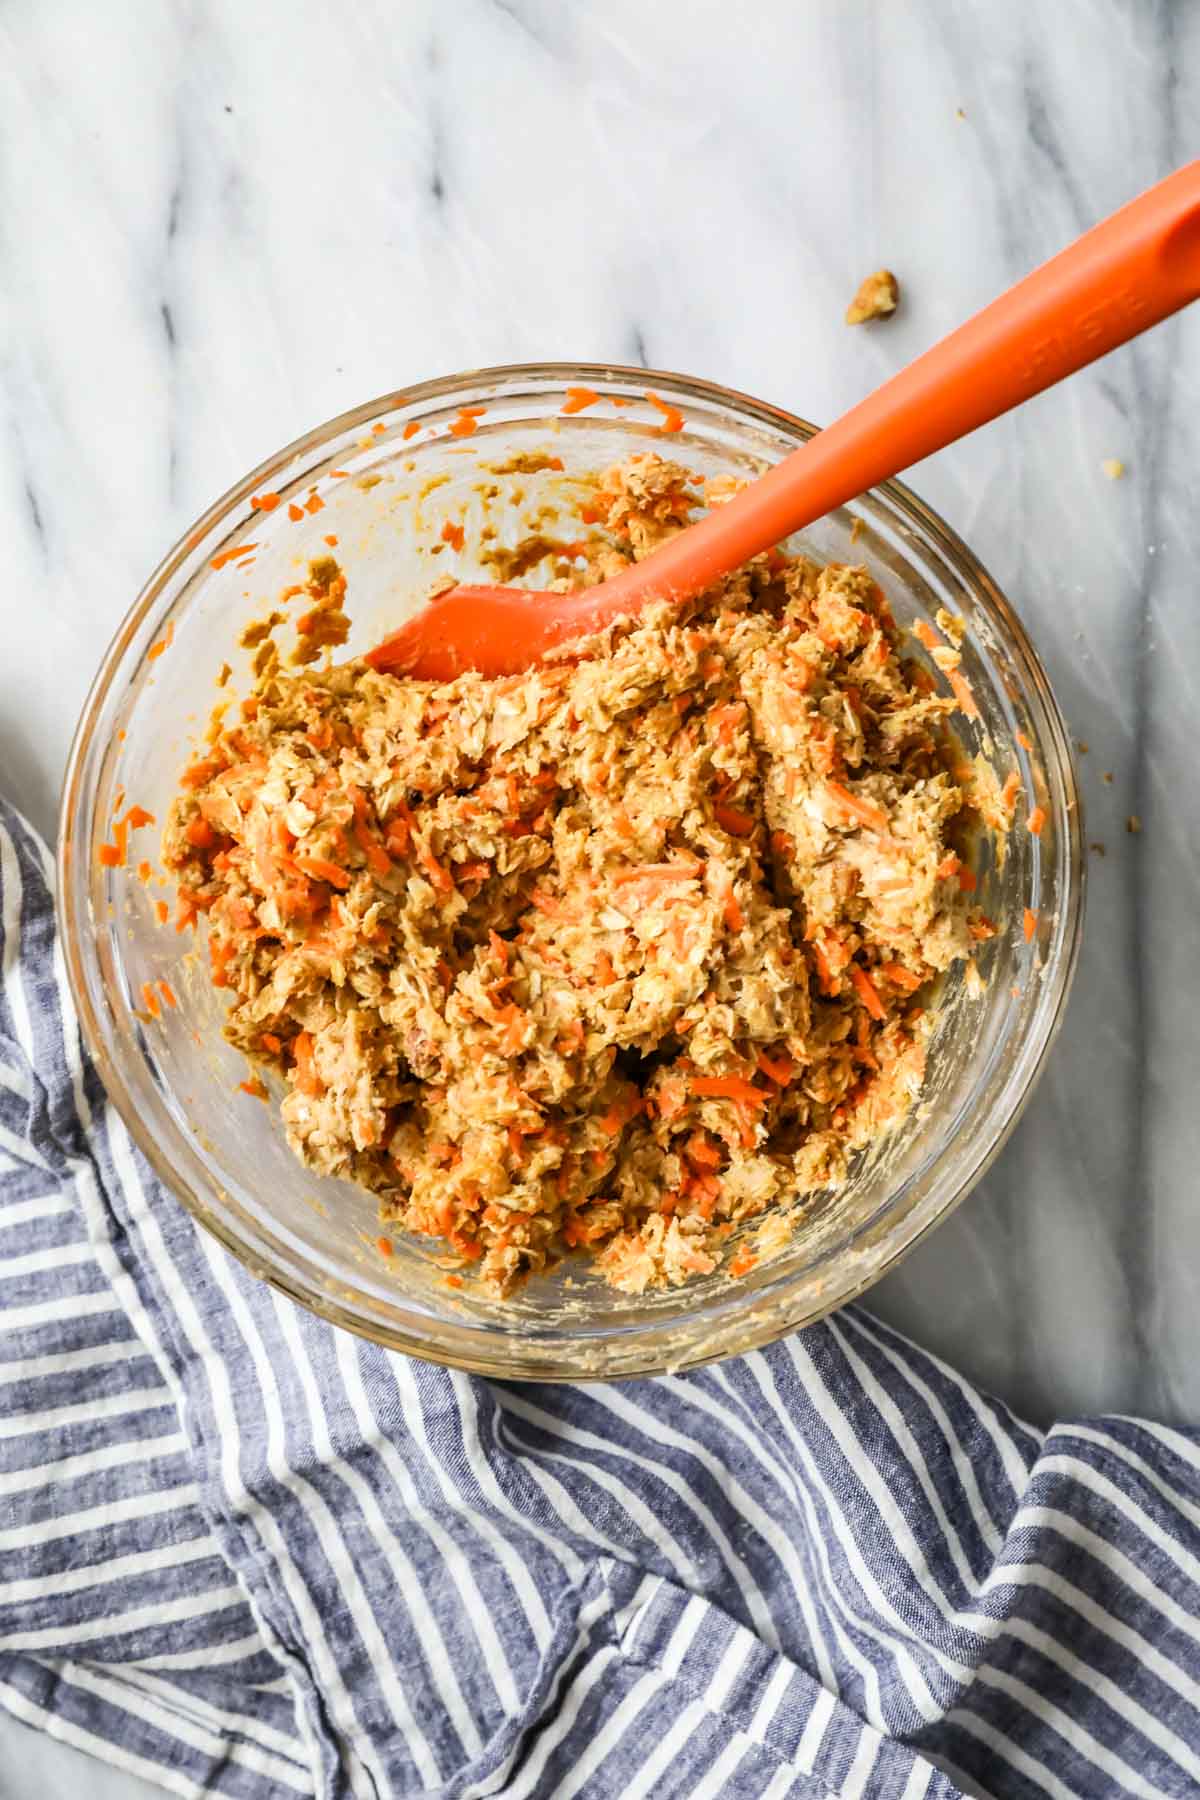 Overhead view of a bowl of cookie dough made with shredded carrots, oats, walnuts, and more.